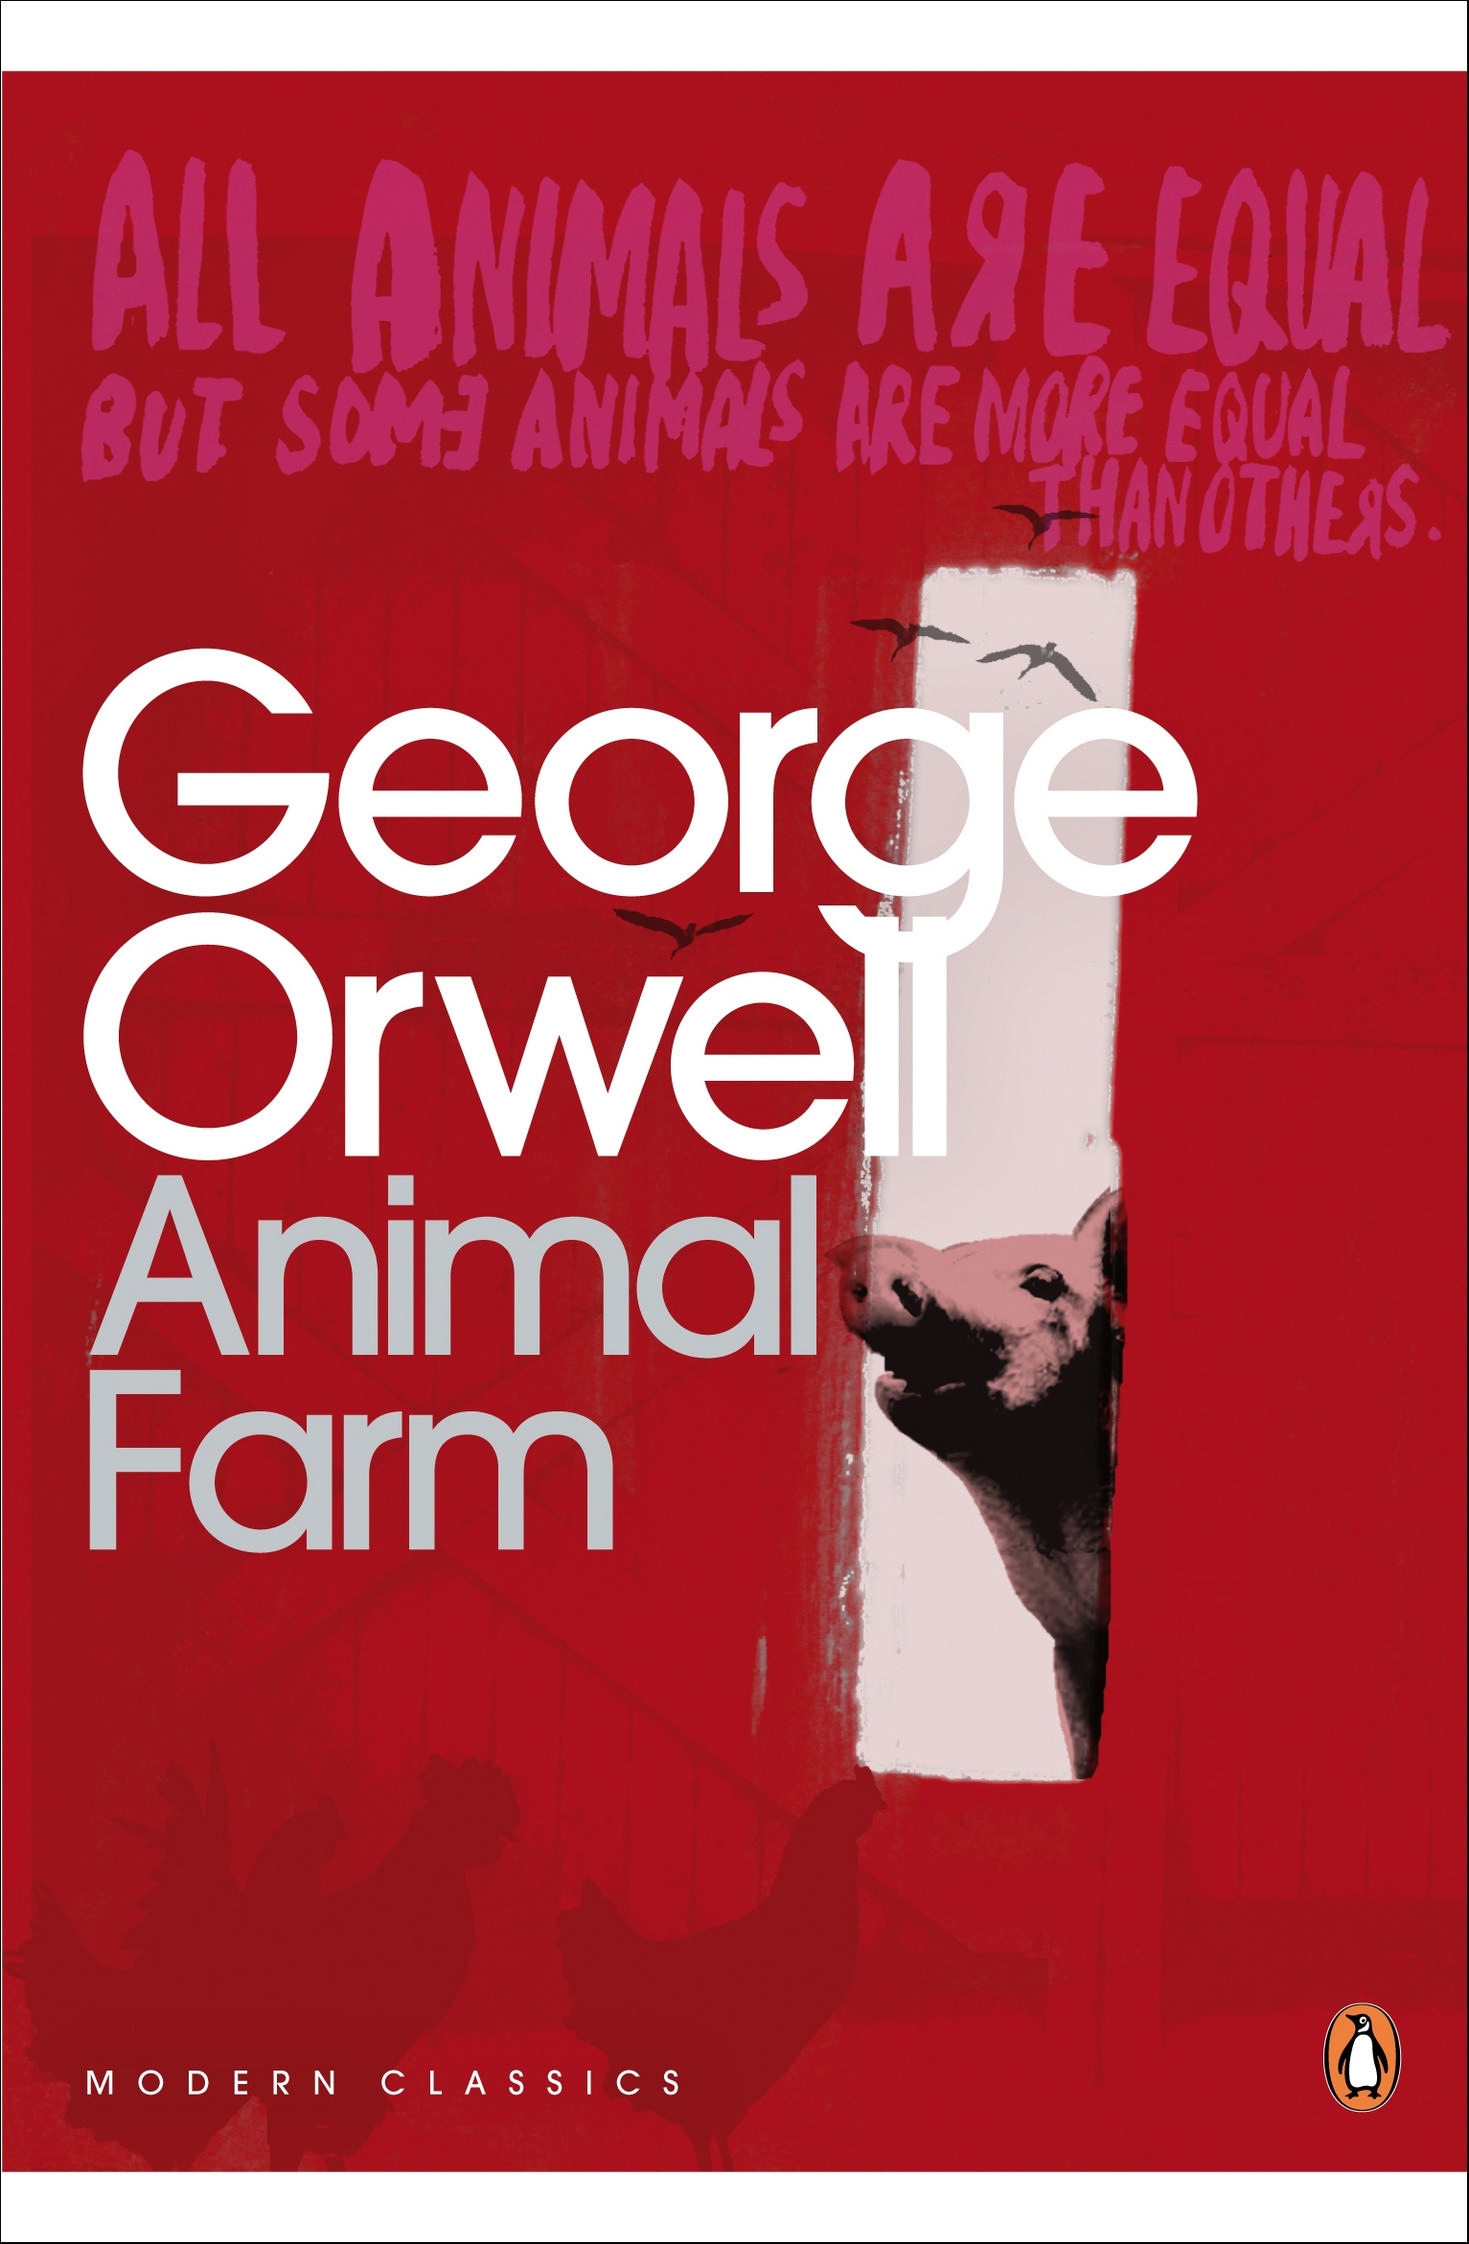 book review george orwell animal farm